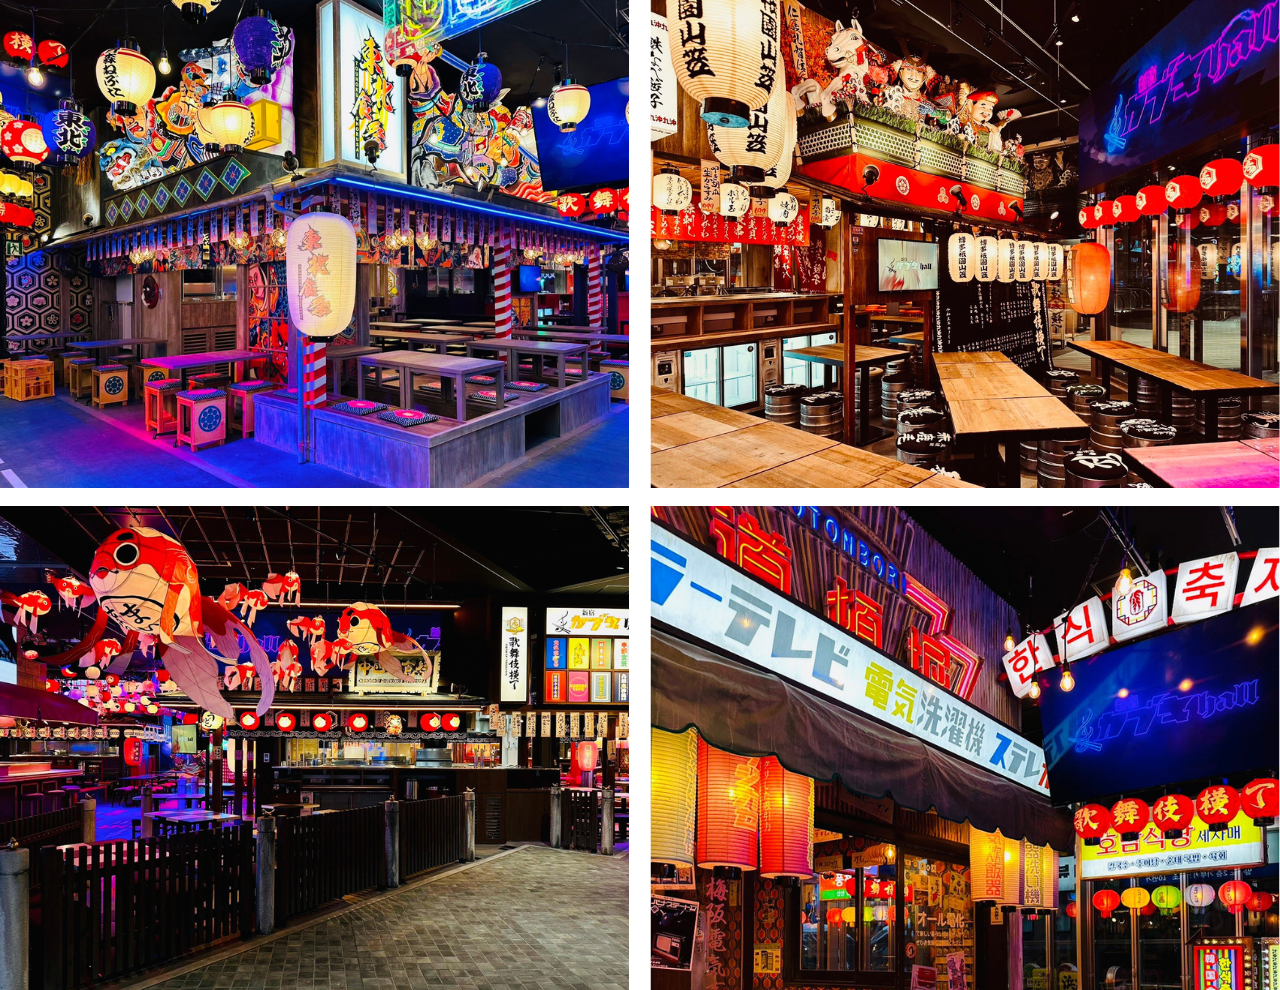 Rich and colorful atmosphere at Shinjuku Kabuki Hall.  The varied offering includes Japanese taiko drumming performances, oiran courtesan parades and battle scenes.  (Images courtesy of Hamakura Style)